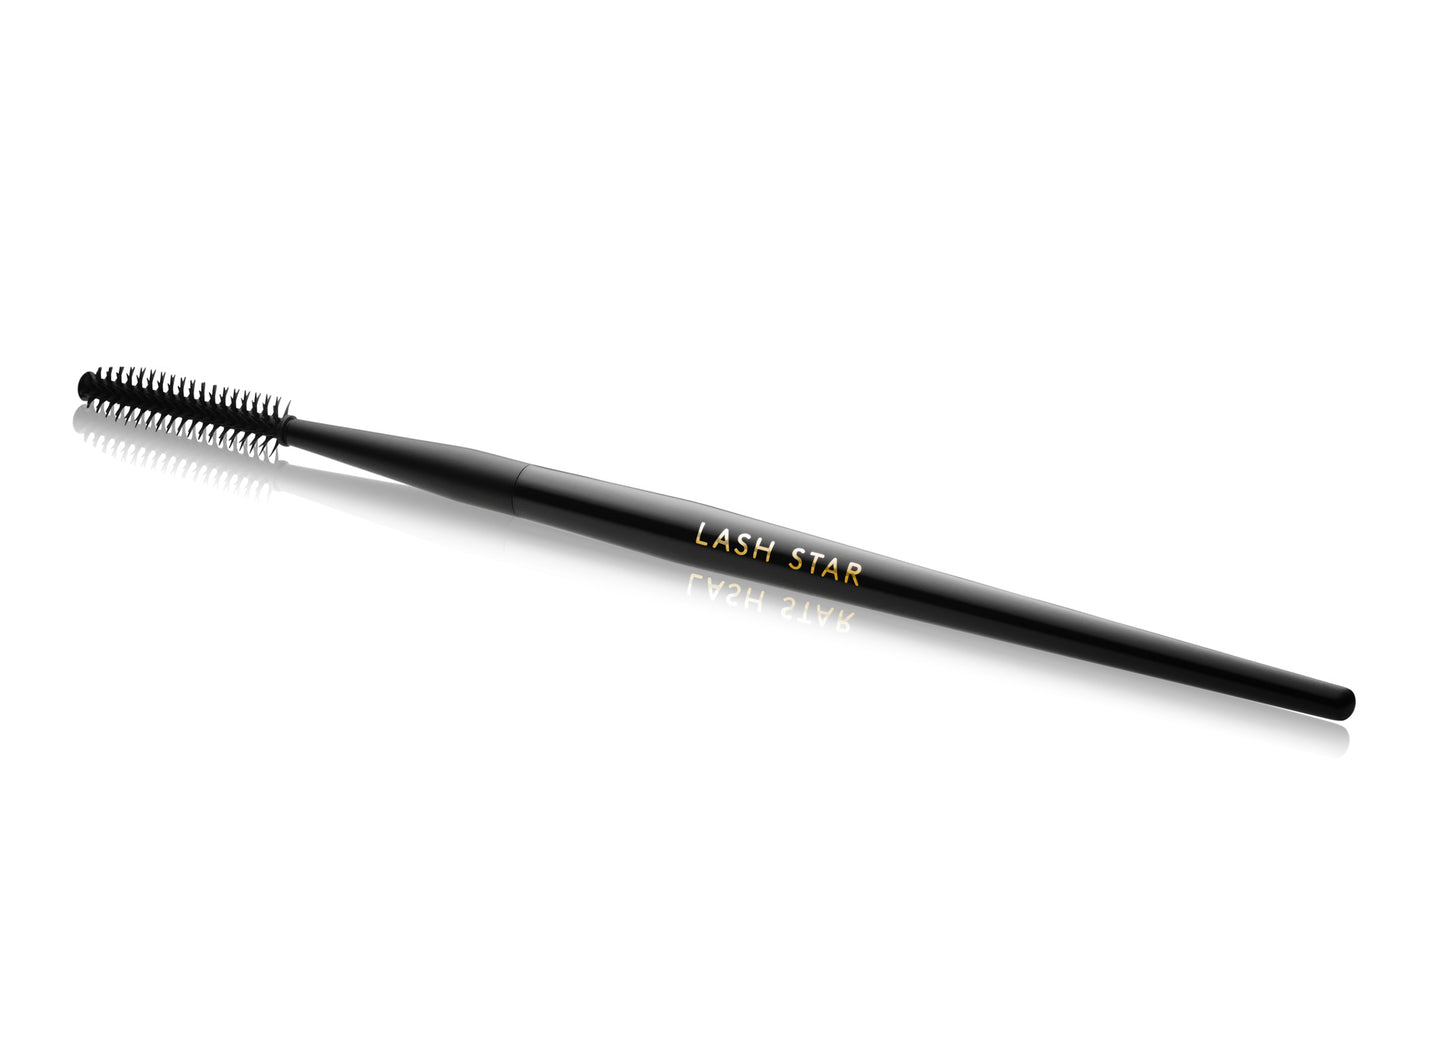 Lash Brush from Lash Star Beauty to brush your lashes or eyebrows